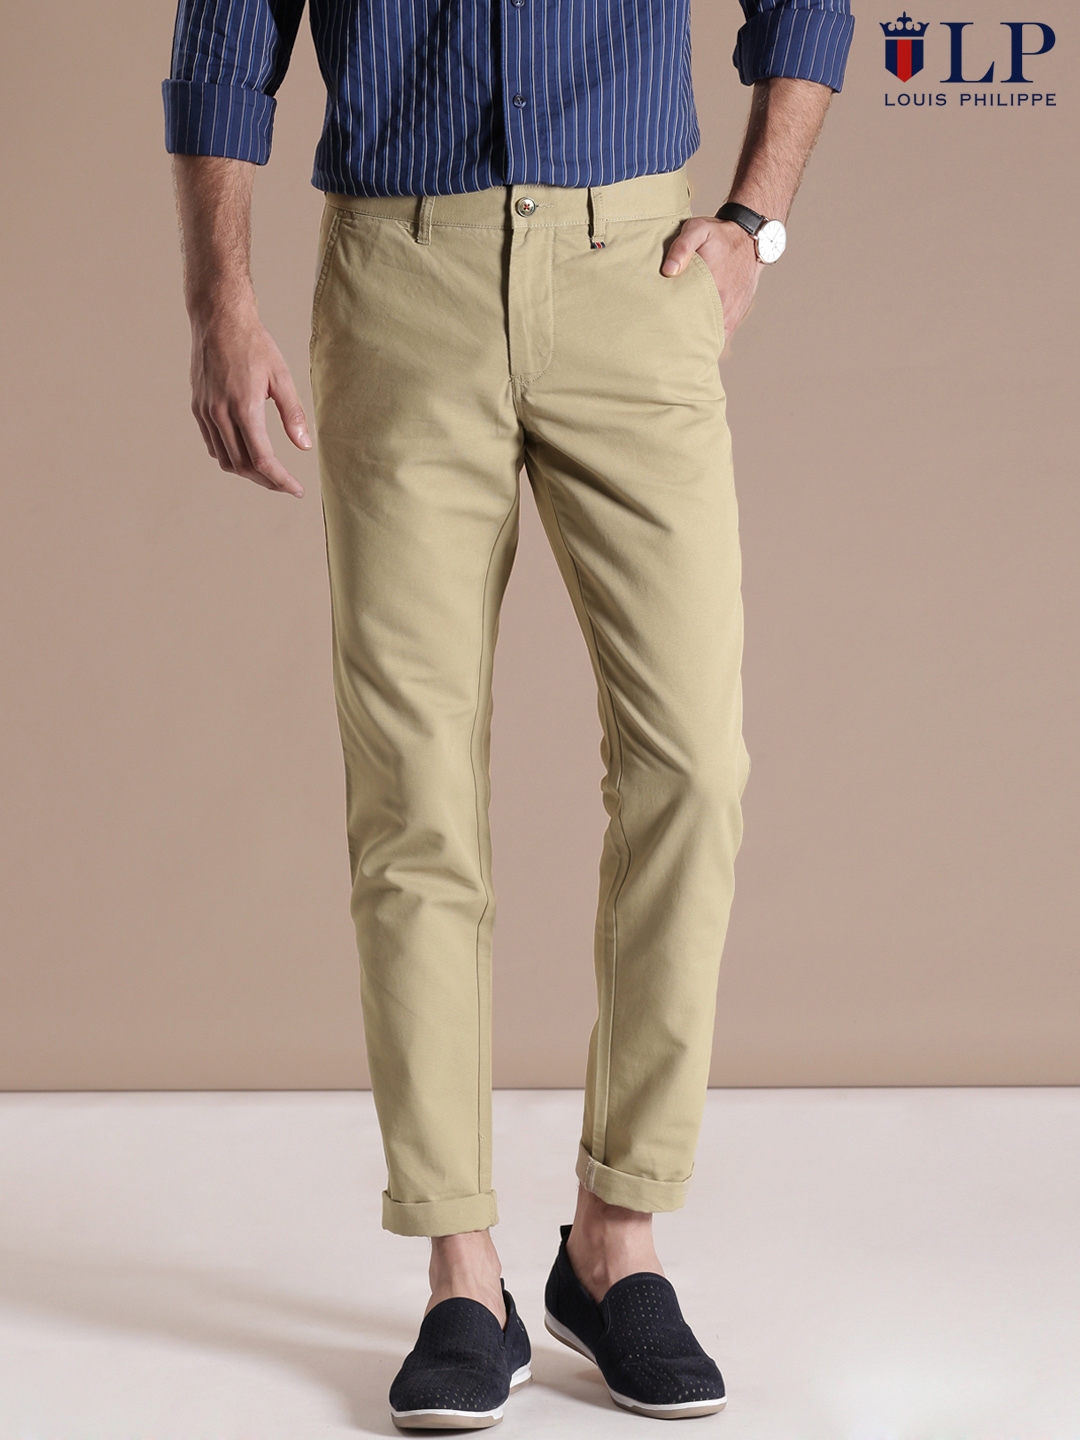 LP Trousers  Chinos Louis Philippe Blue Trousers for Men at Louisphilippe com